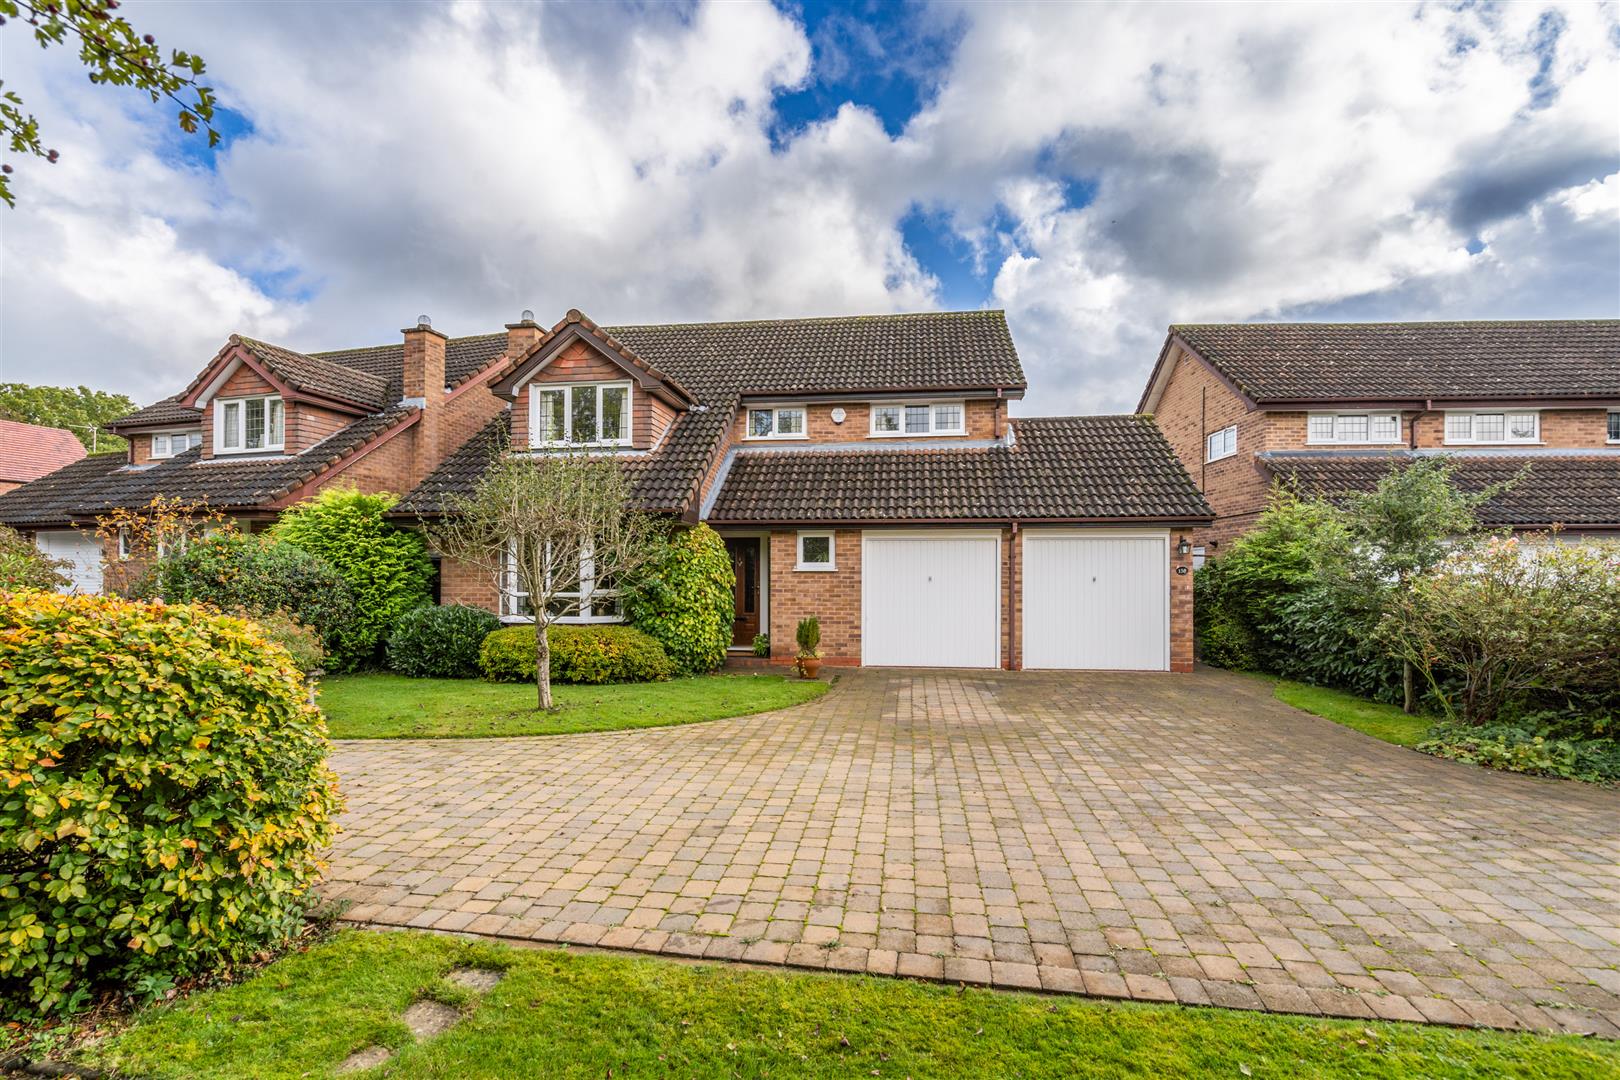 4 bed detached house for sale in Browns Lane, Solihull  - Property Image 1